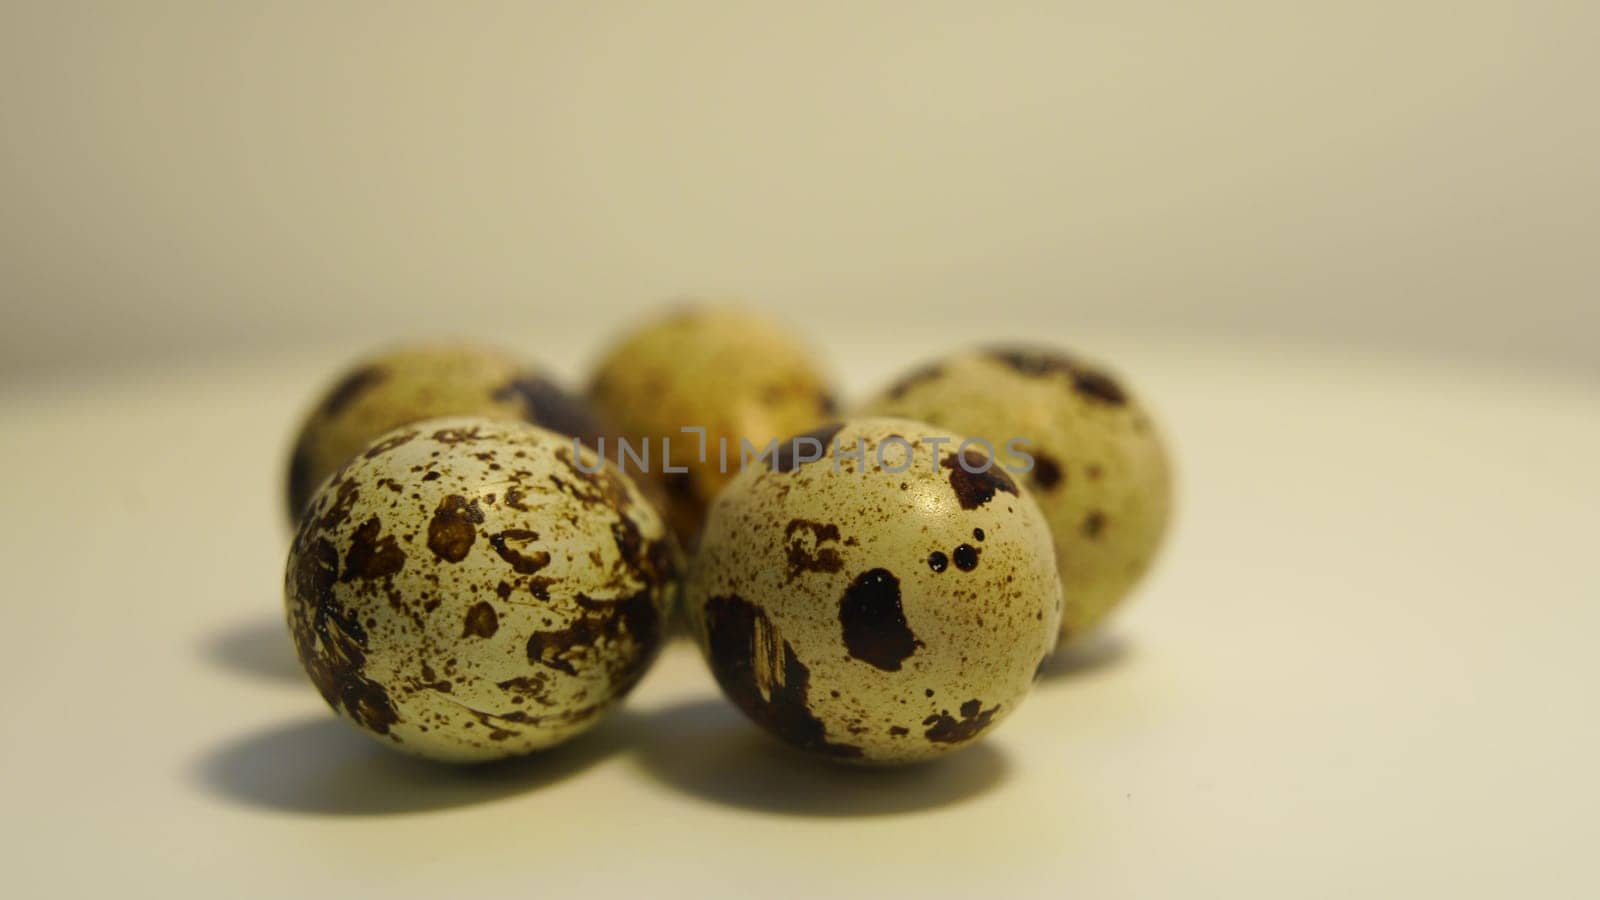 Spotted quail eggs on a light background, natural eco-friendly products